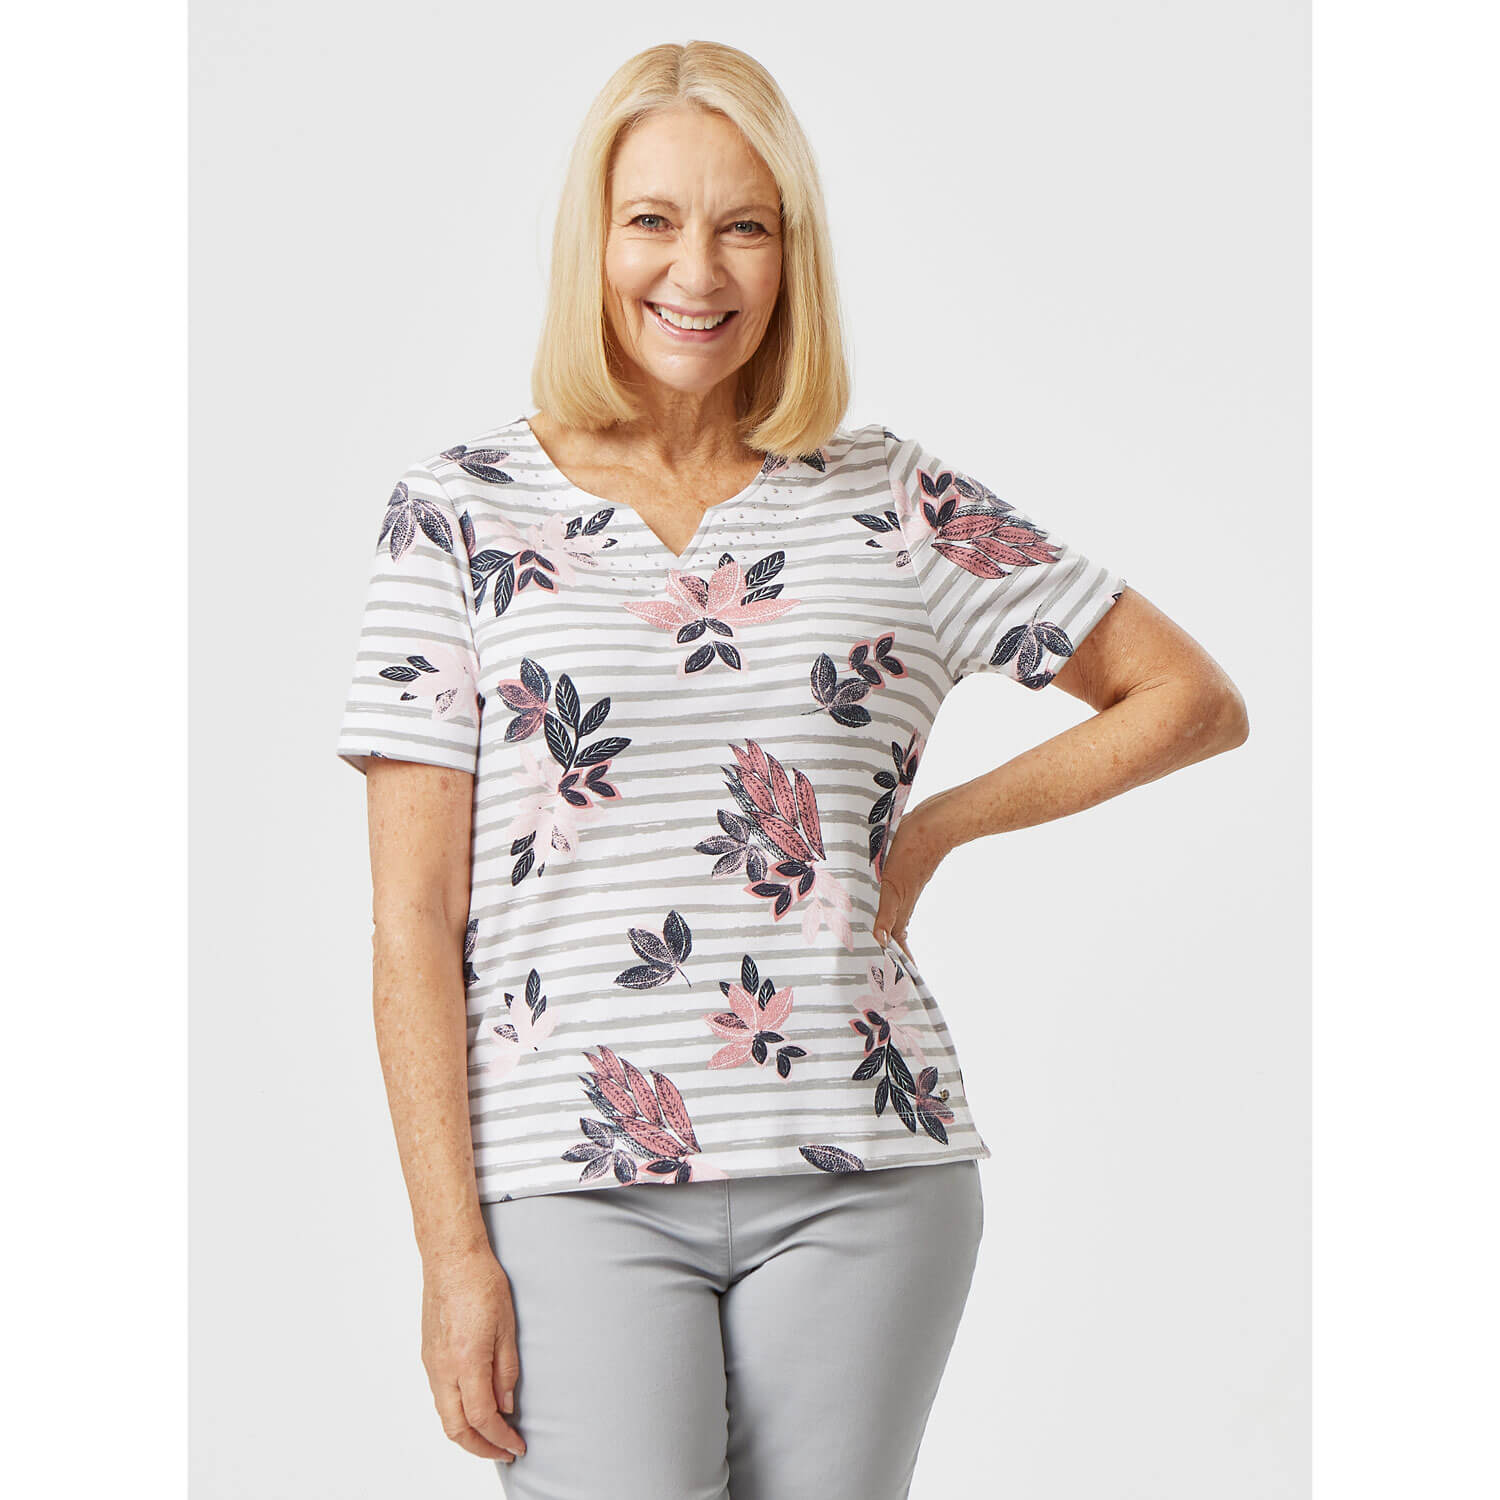 Tigiwear Notch Neck All Over Print Stripe Top 1 Shaws Department Stores